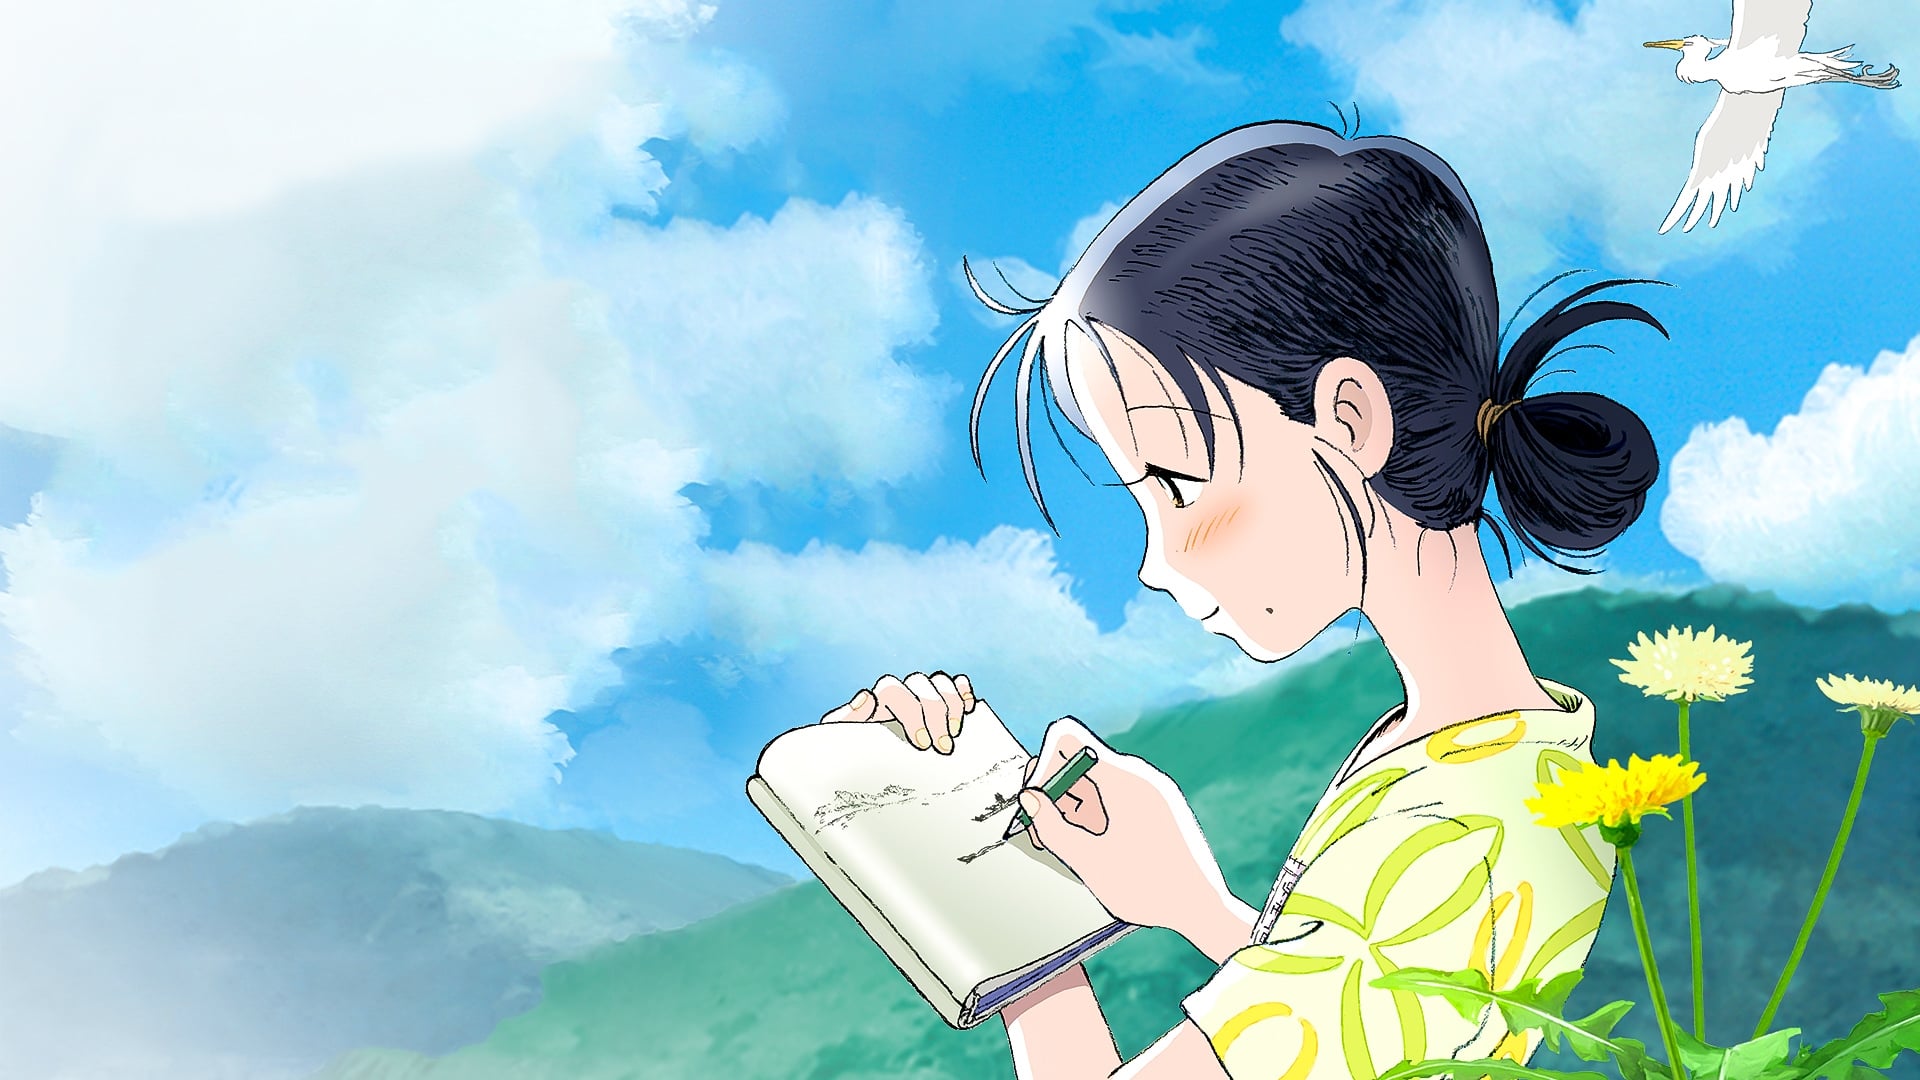 Góc Khuất Của Thế Giới - In This Corner Of The World